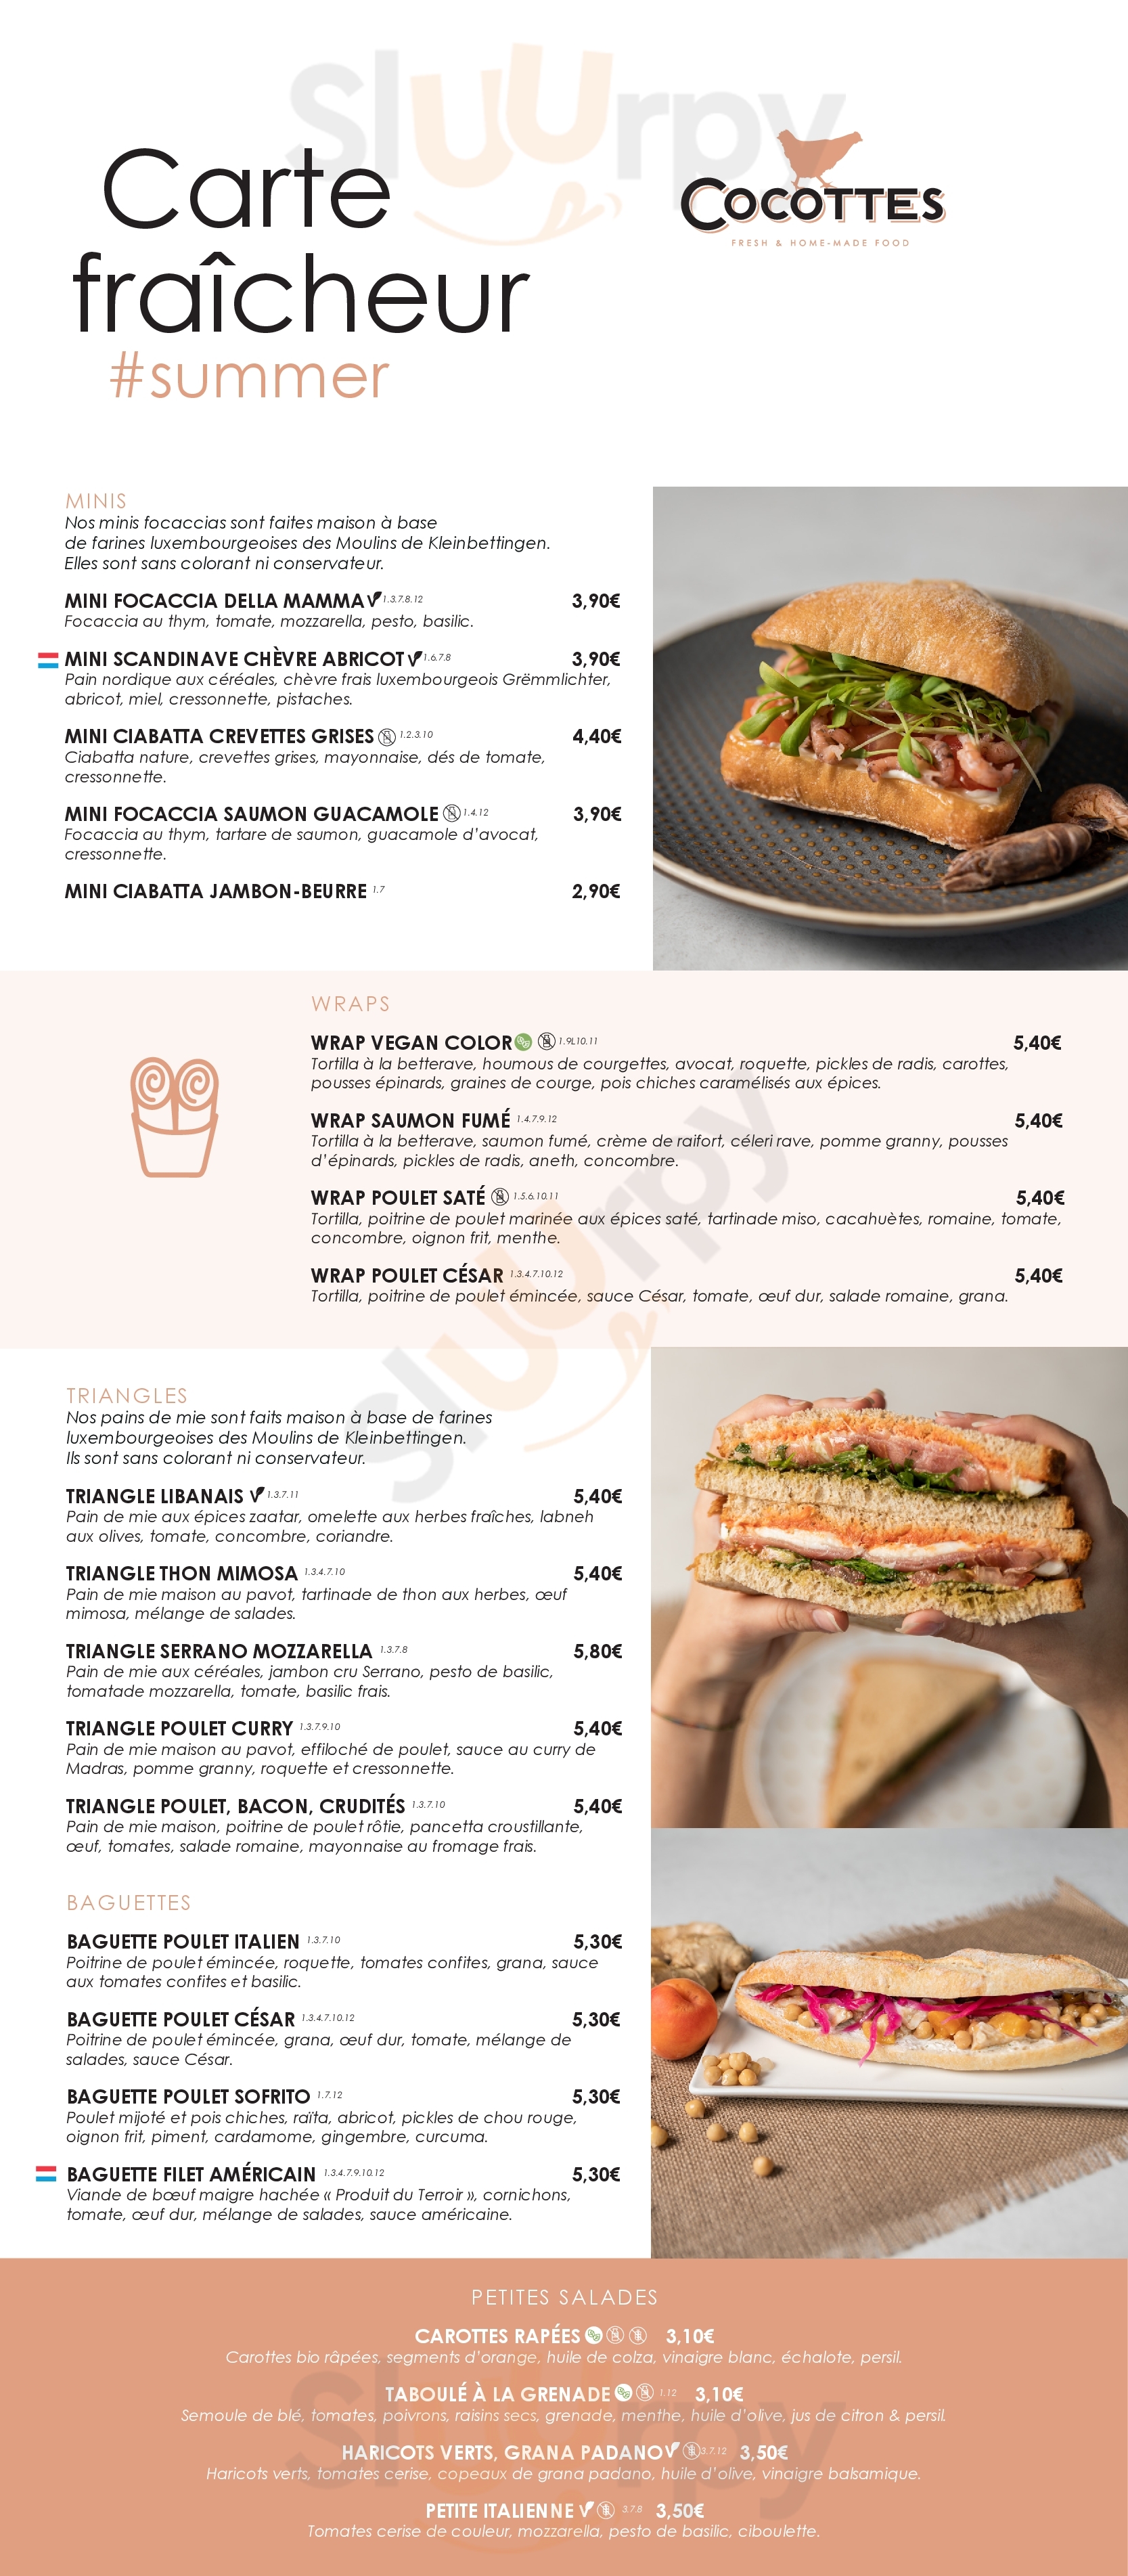 Cocottes Glacis Luxembourg Menu - 1